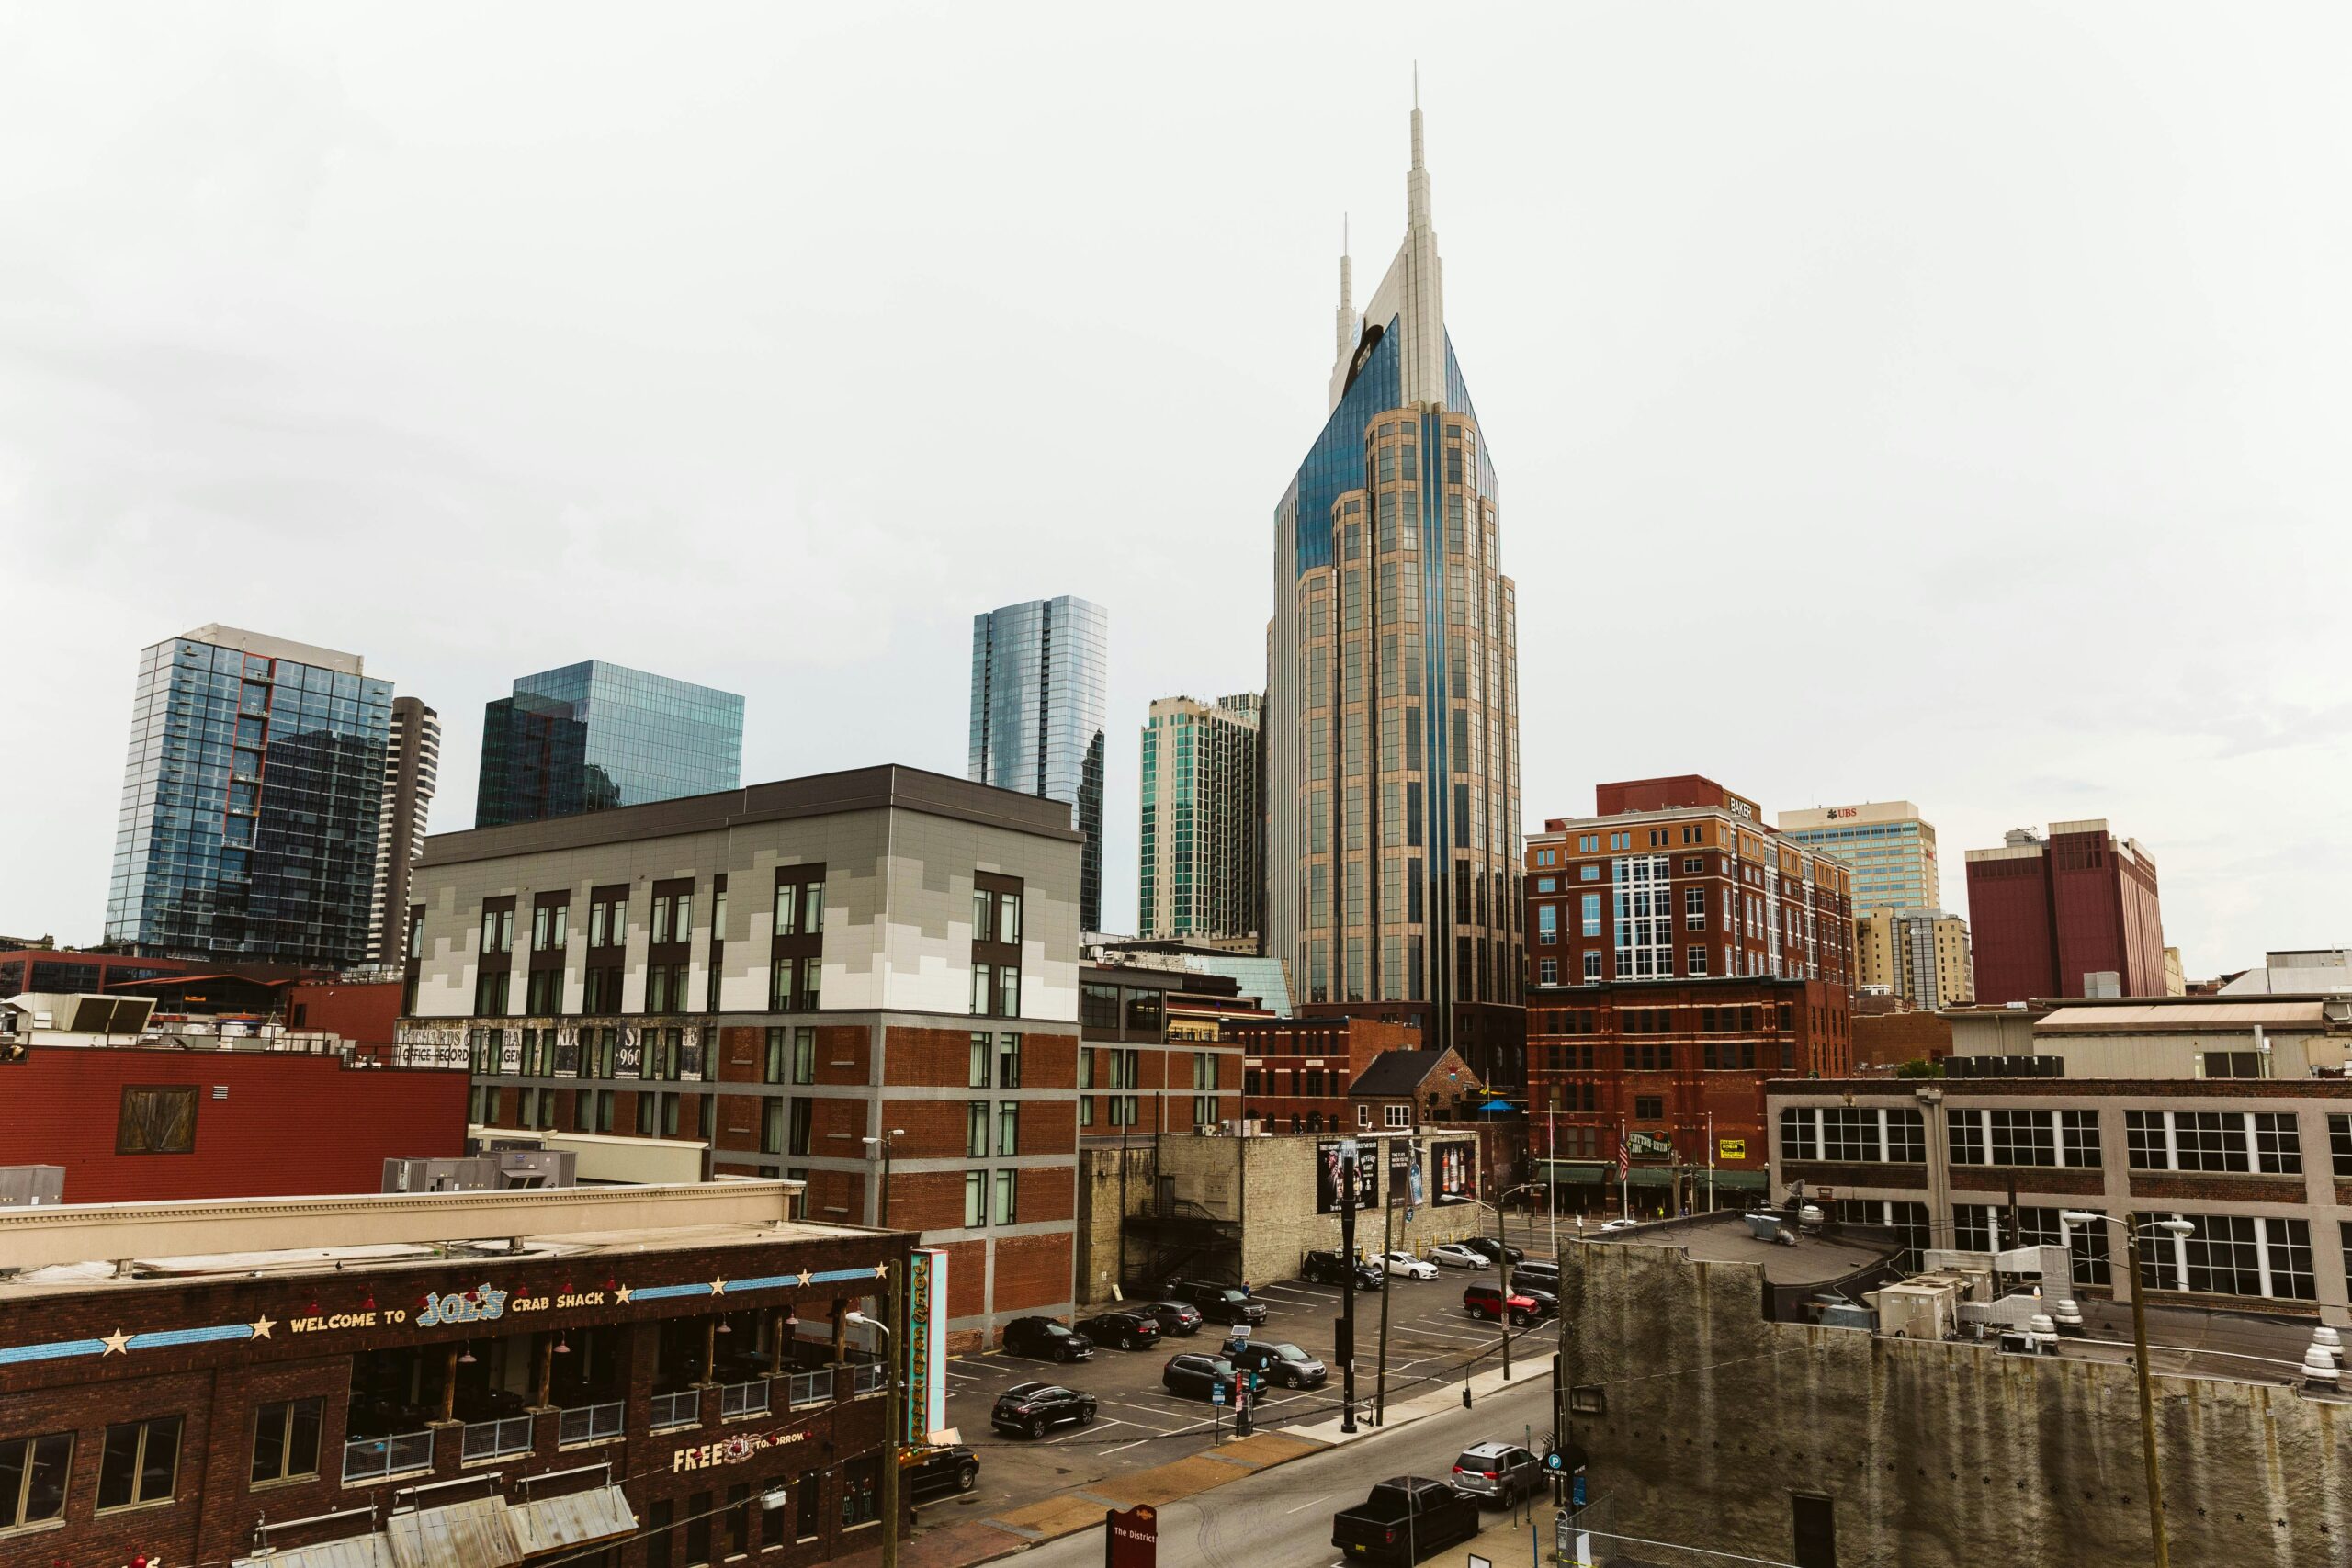 The Gulch is a trendy and hipster neighborhood and is one of the best neighborhoods in Nashville for bars, coffee shops and restaurants. Pictured: Nashville